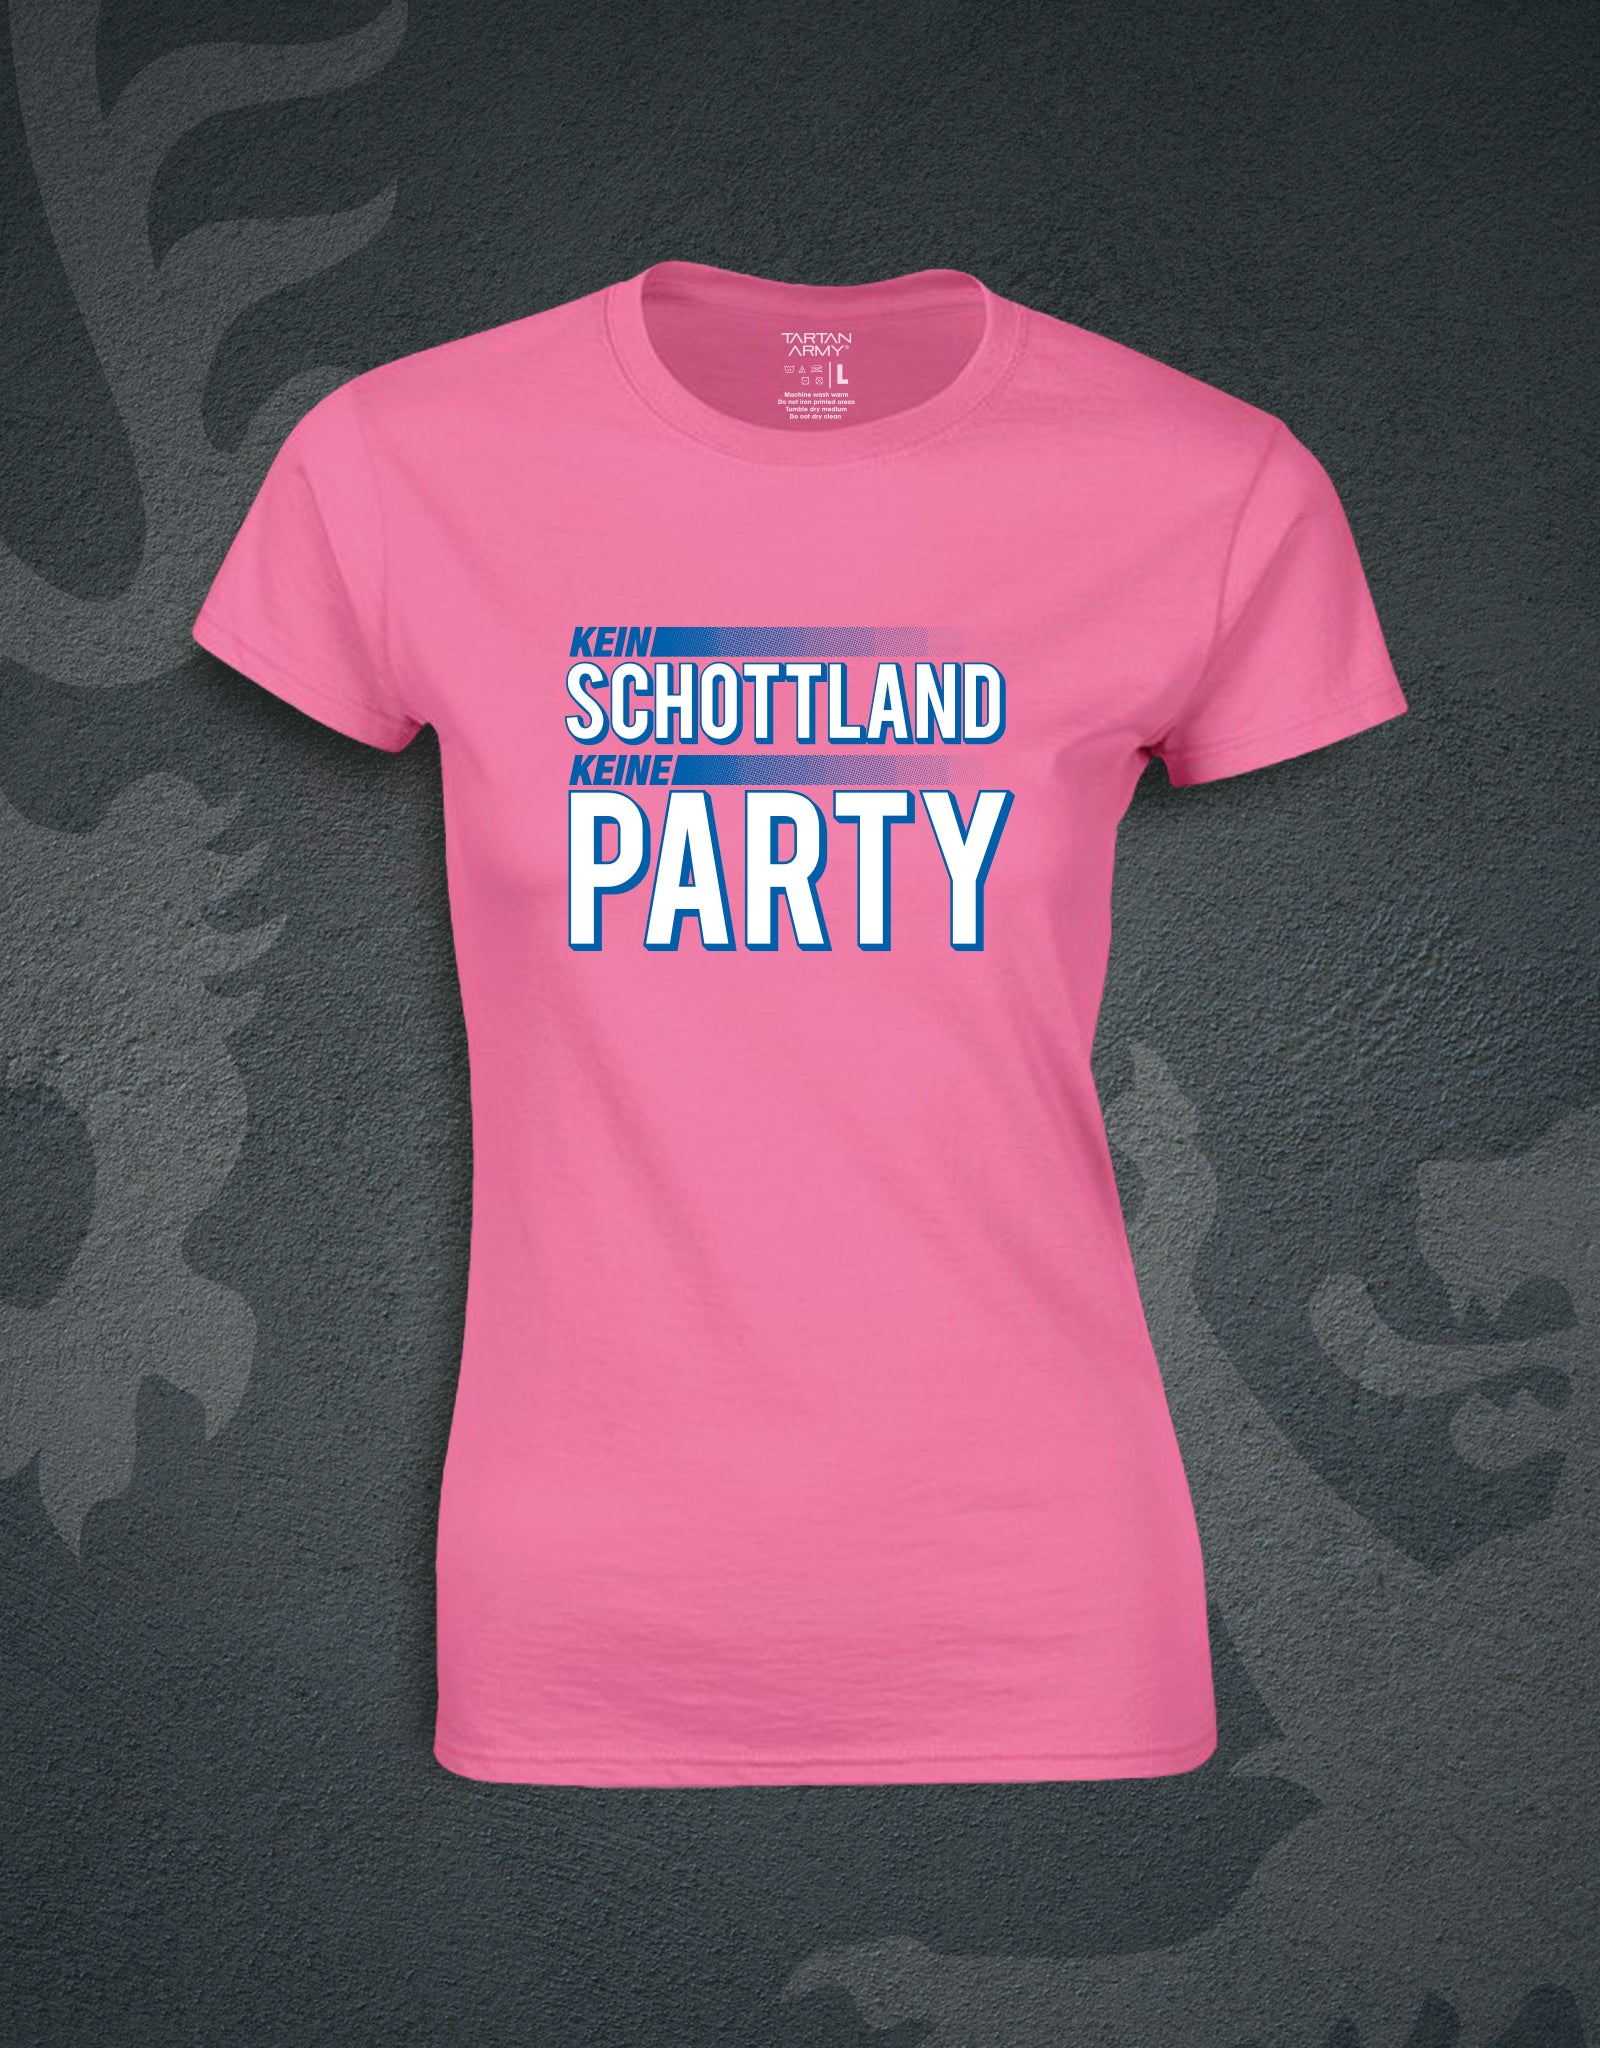 Kein Schottland Fitted T-Shirt | Pink | Official Tartan Army Store